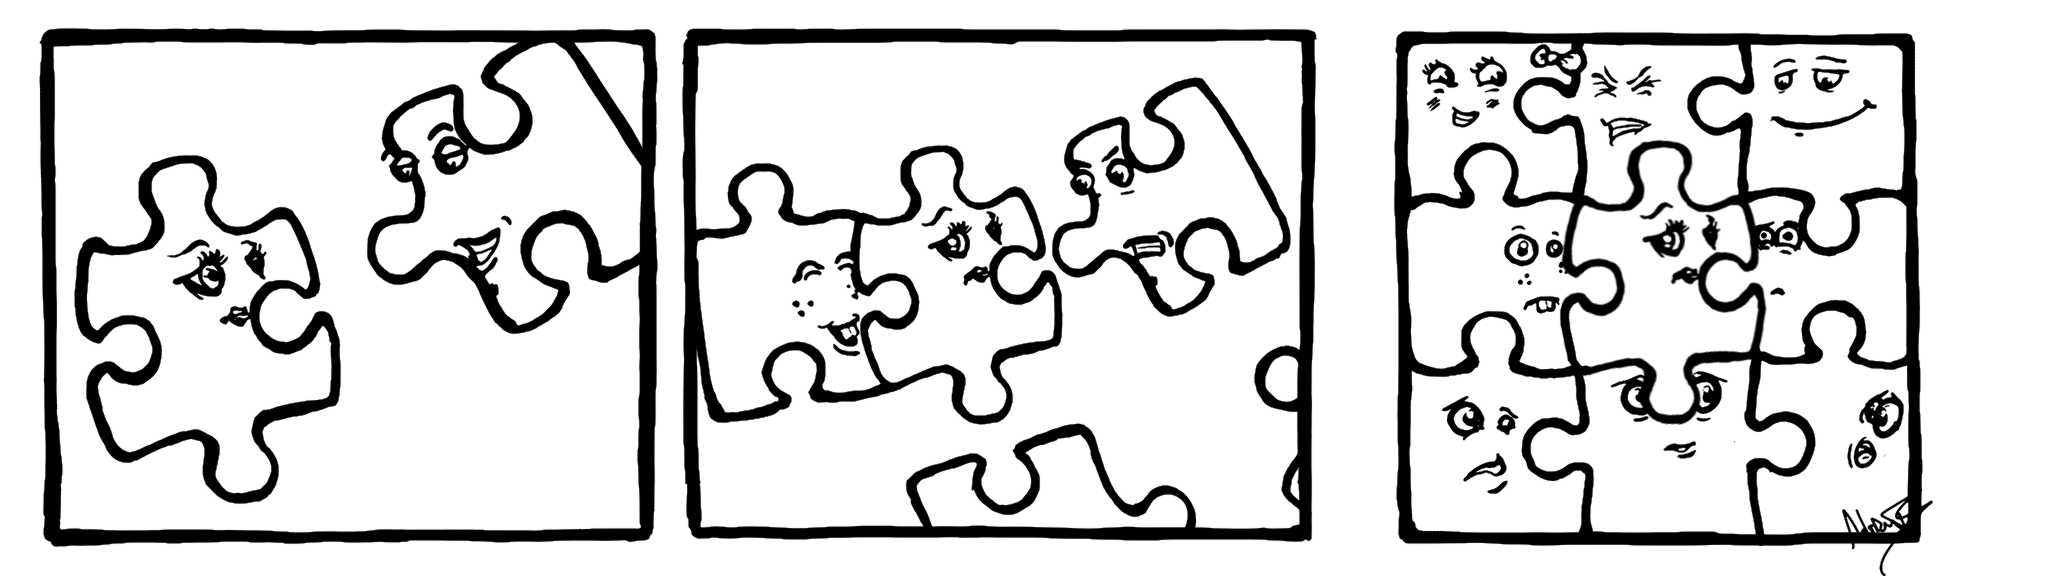 A Puzzling Orgy